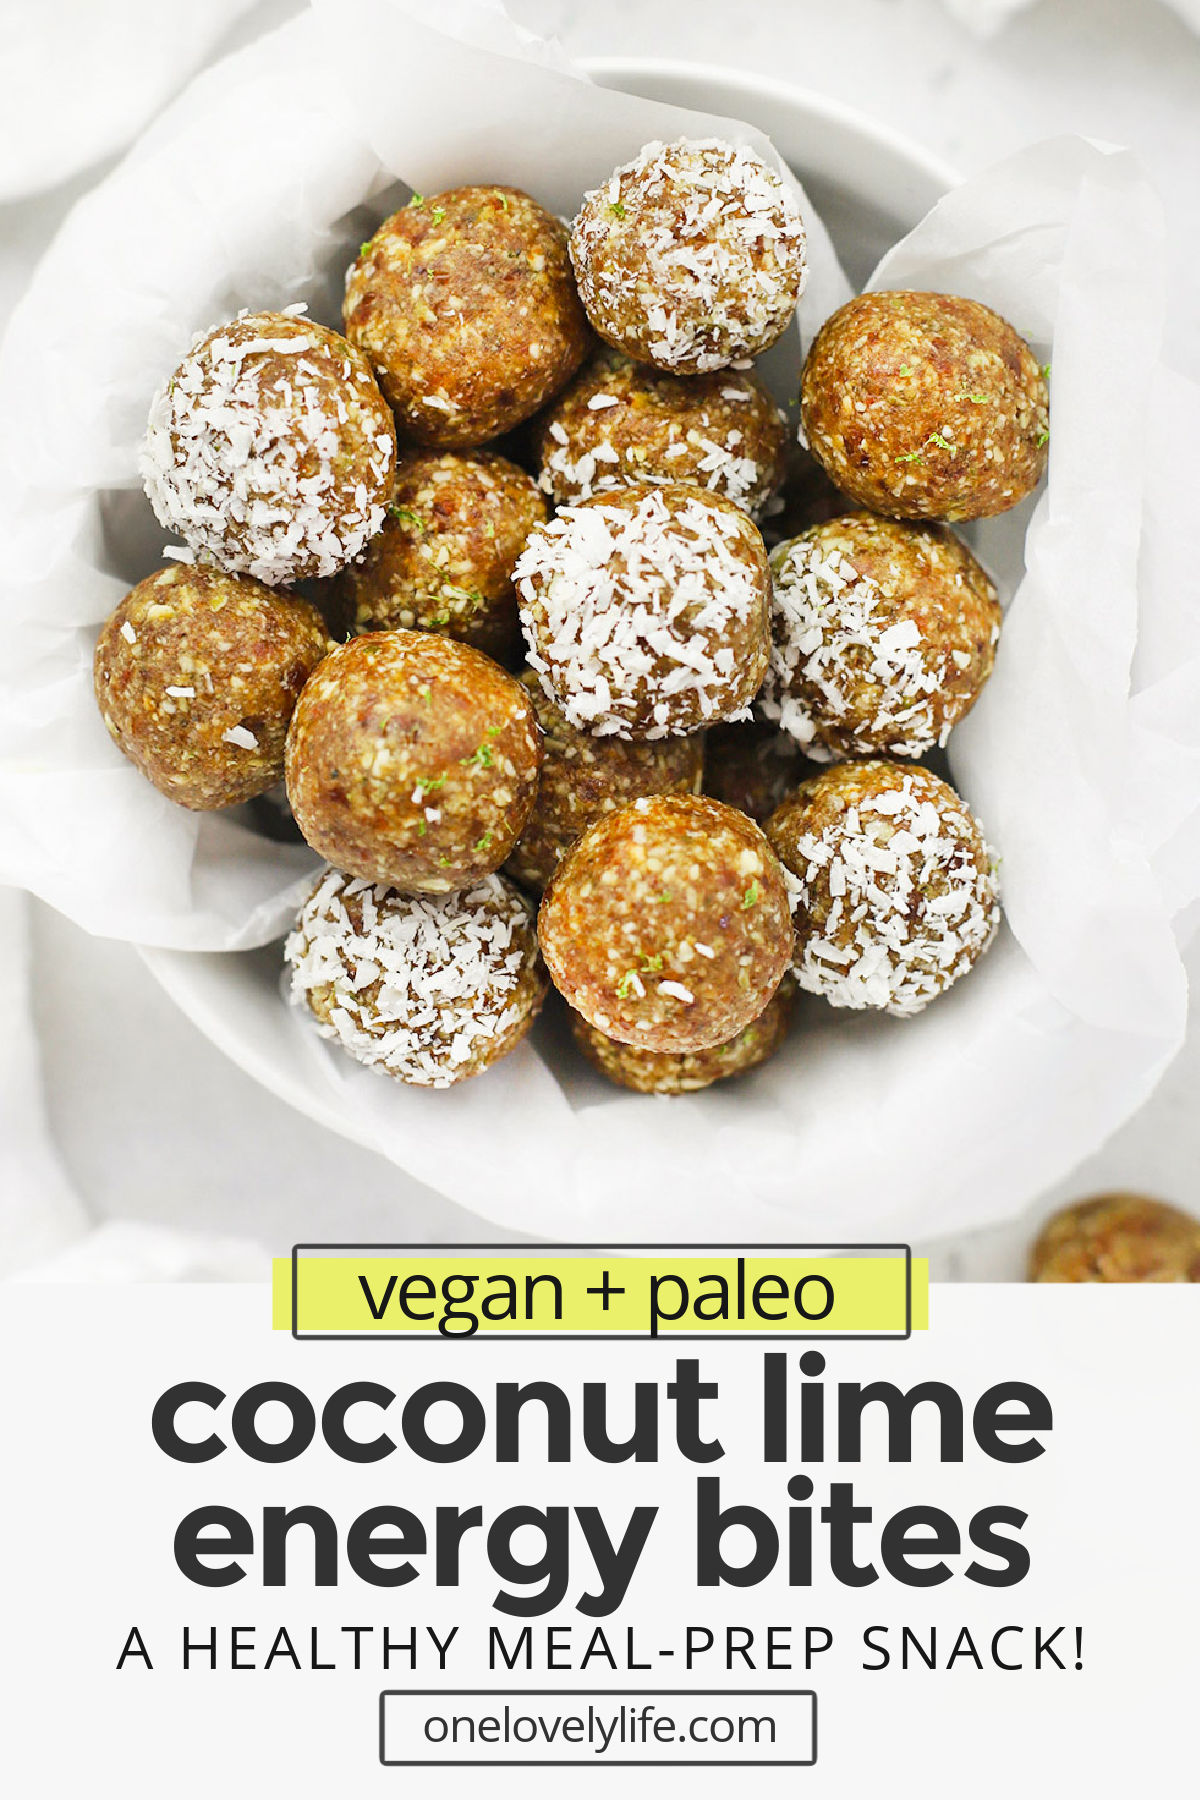 Coconut Lime Energy Bites - These nut-free lime energy bites are perfect for meal prep, healthy snacking, or packing in lunches. (Gluten free, vegan, and paleo approved!) // Nut Free snack // Nut free lunch idea // Nut free energy bites // #paleo #vegan #nutfree #energybites #energyballs